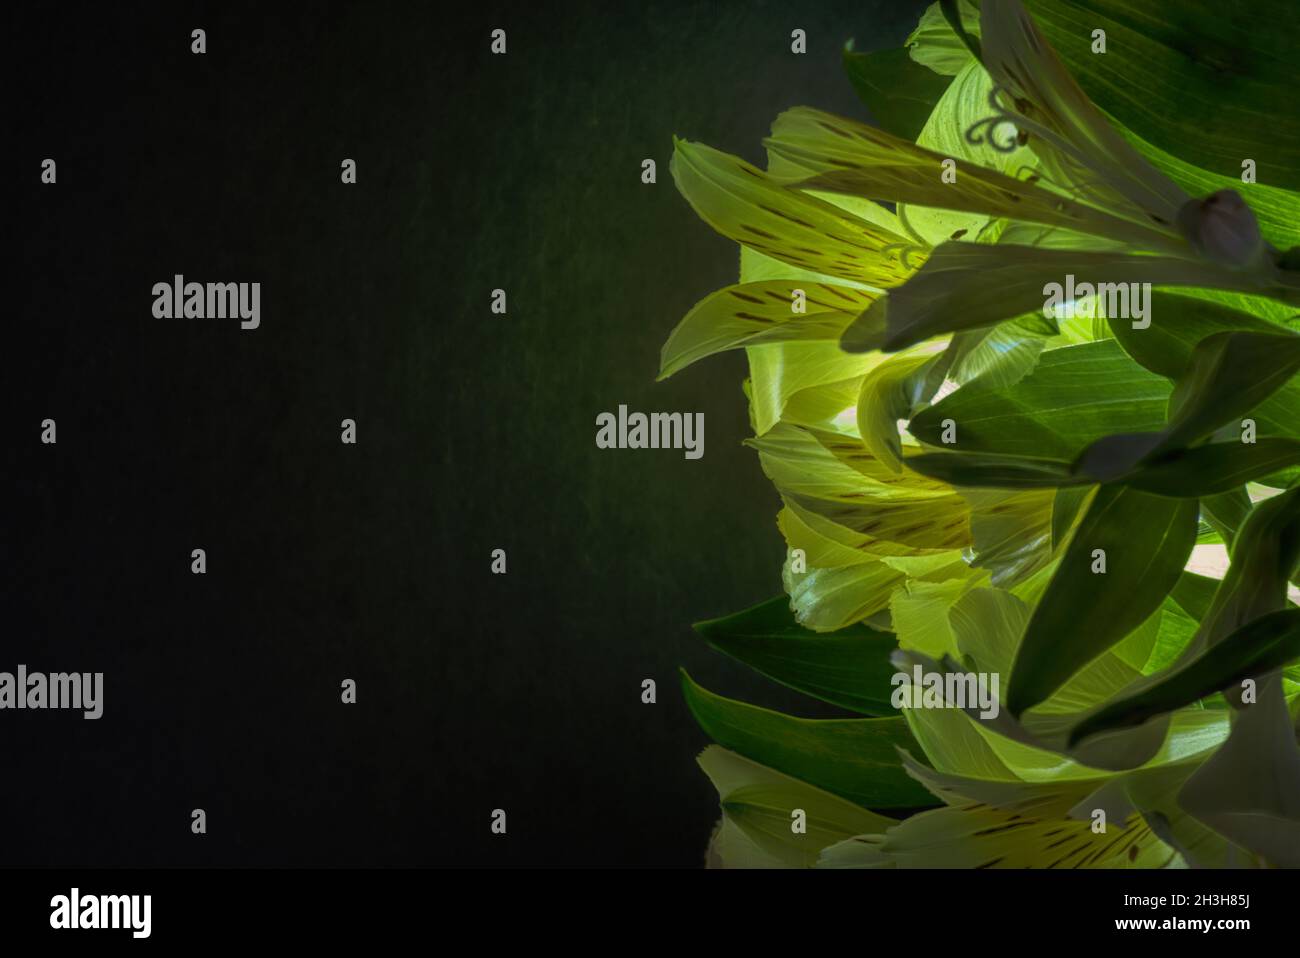 Shades of green.  Alstroemeria flowers and leaves are laid flat on right side of image against black background with lots of space for copy and text. Stock Photo